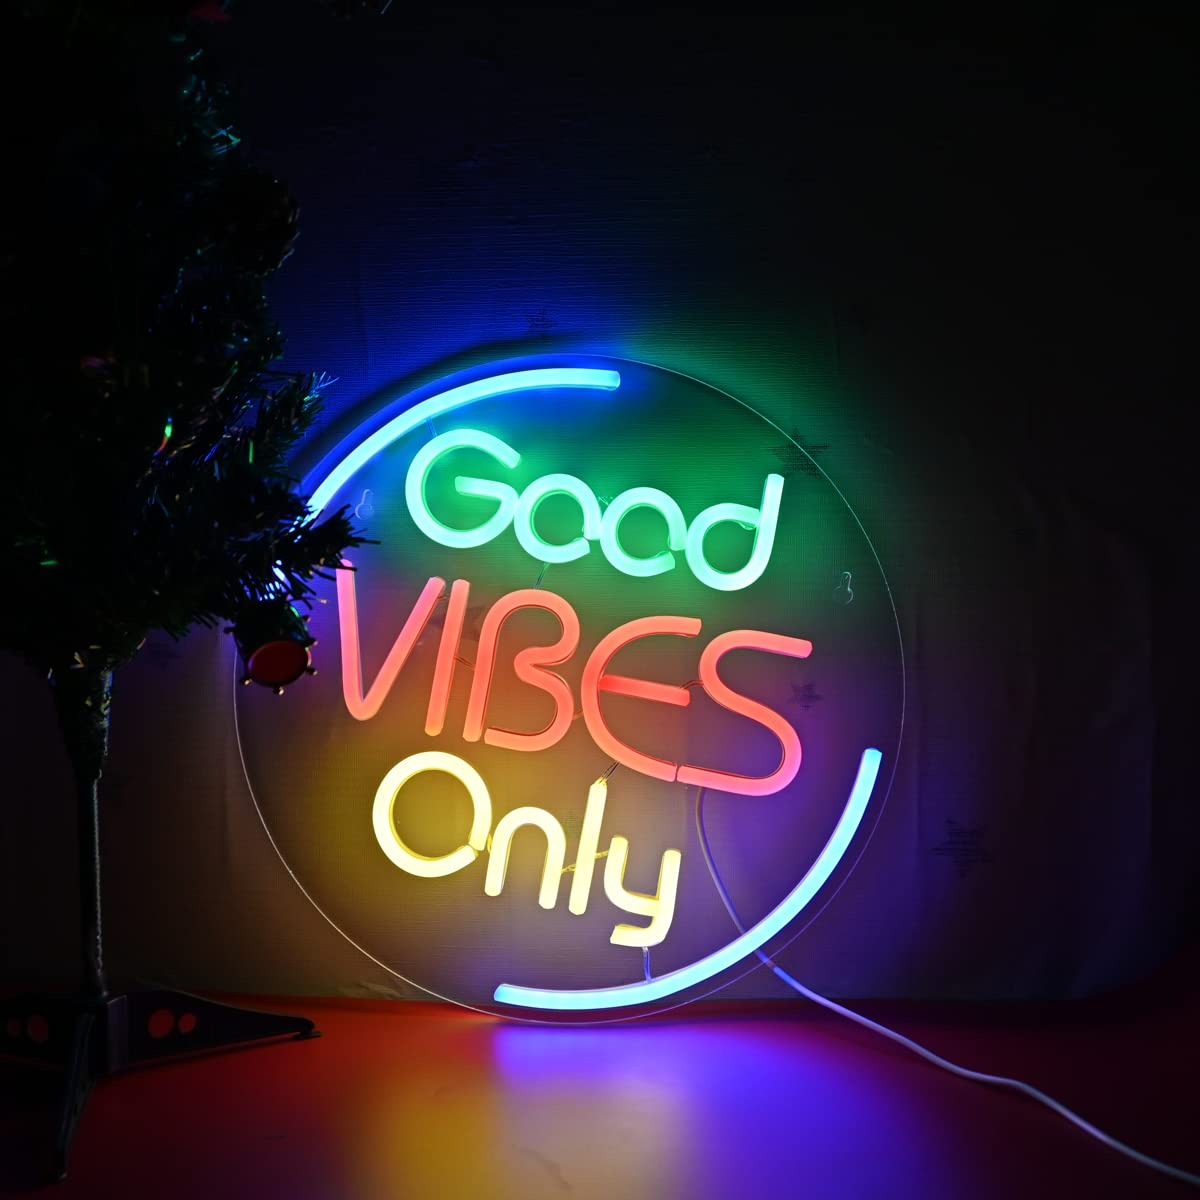 A colorful neon sign “Good Vibes Only”